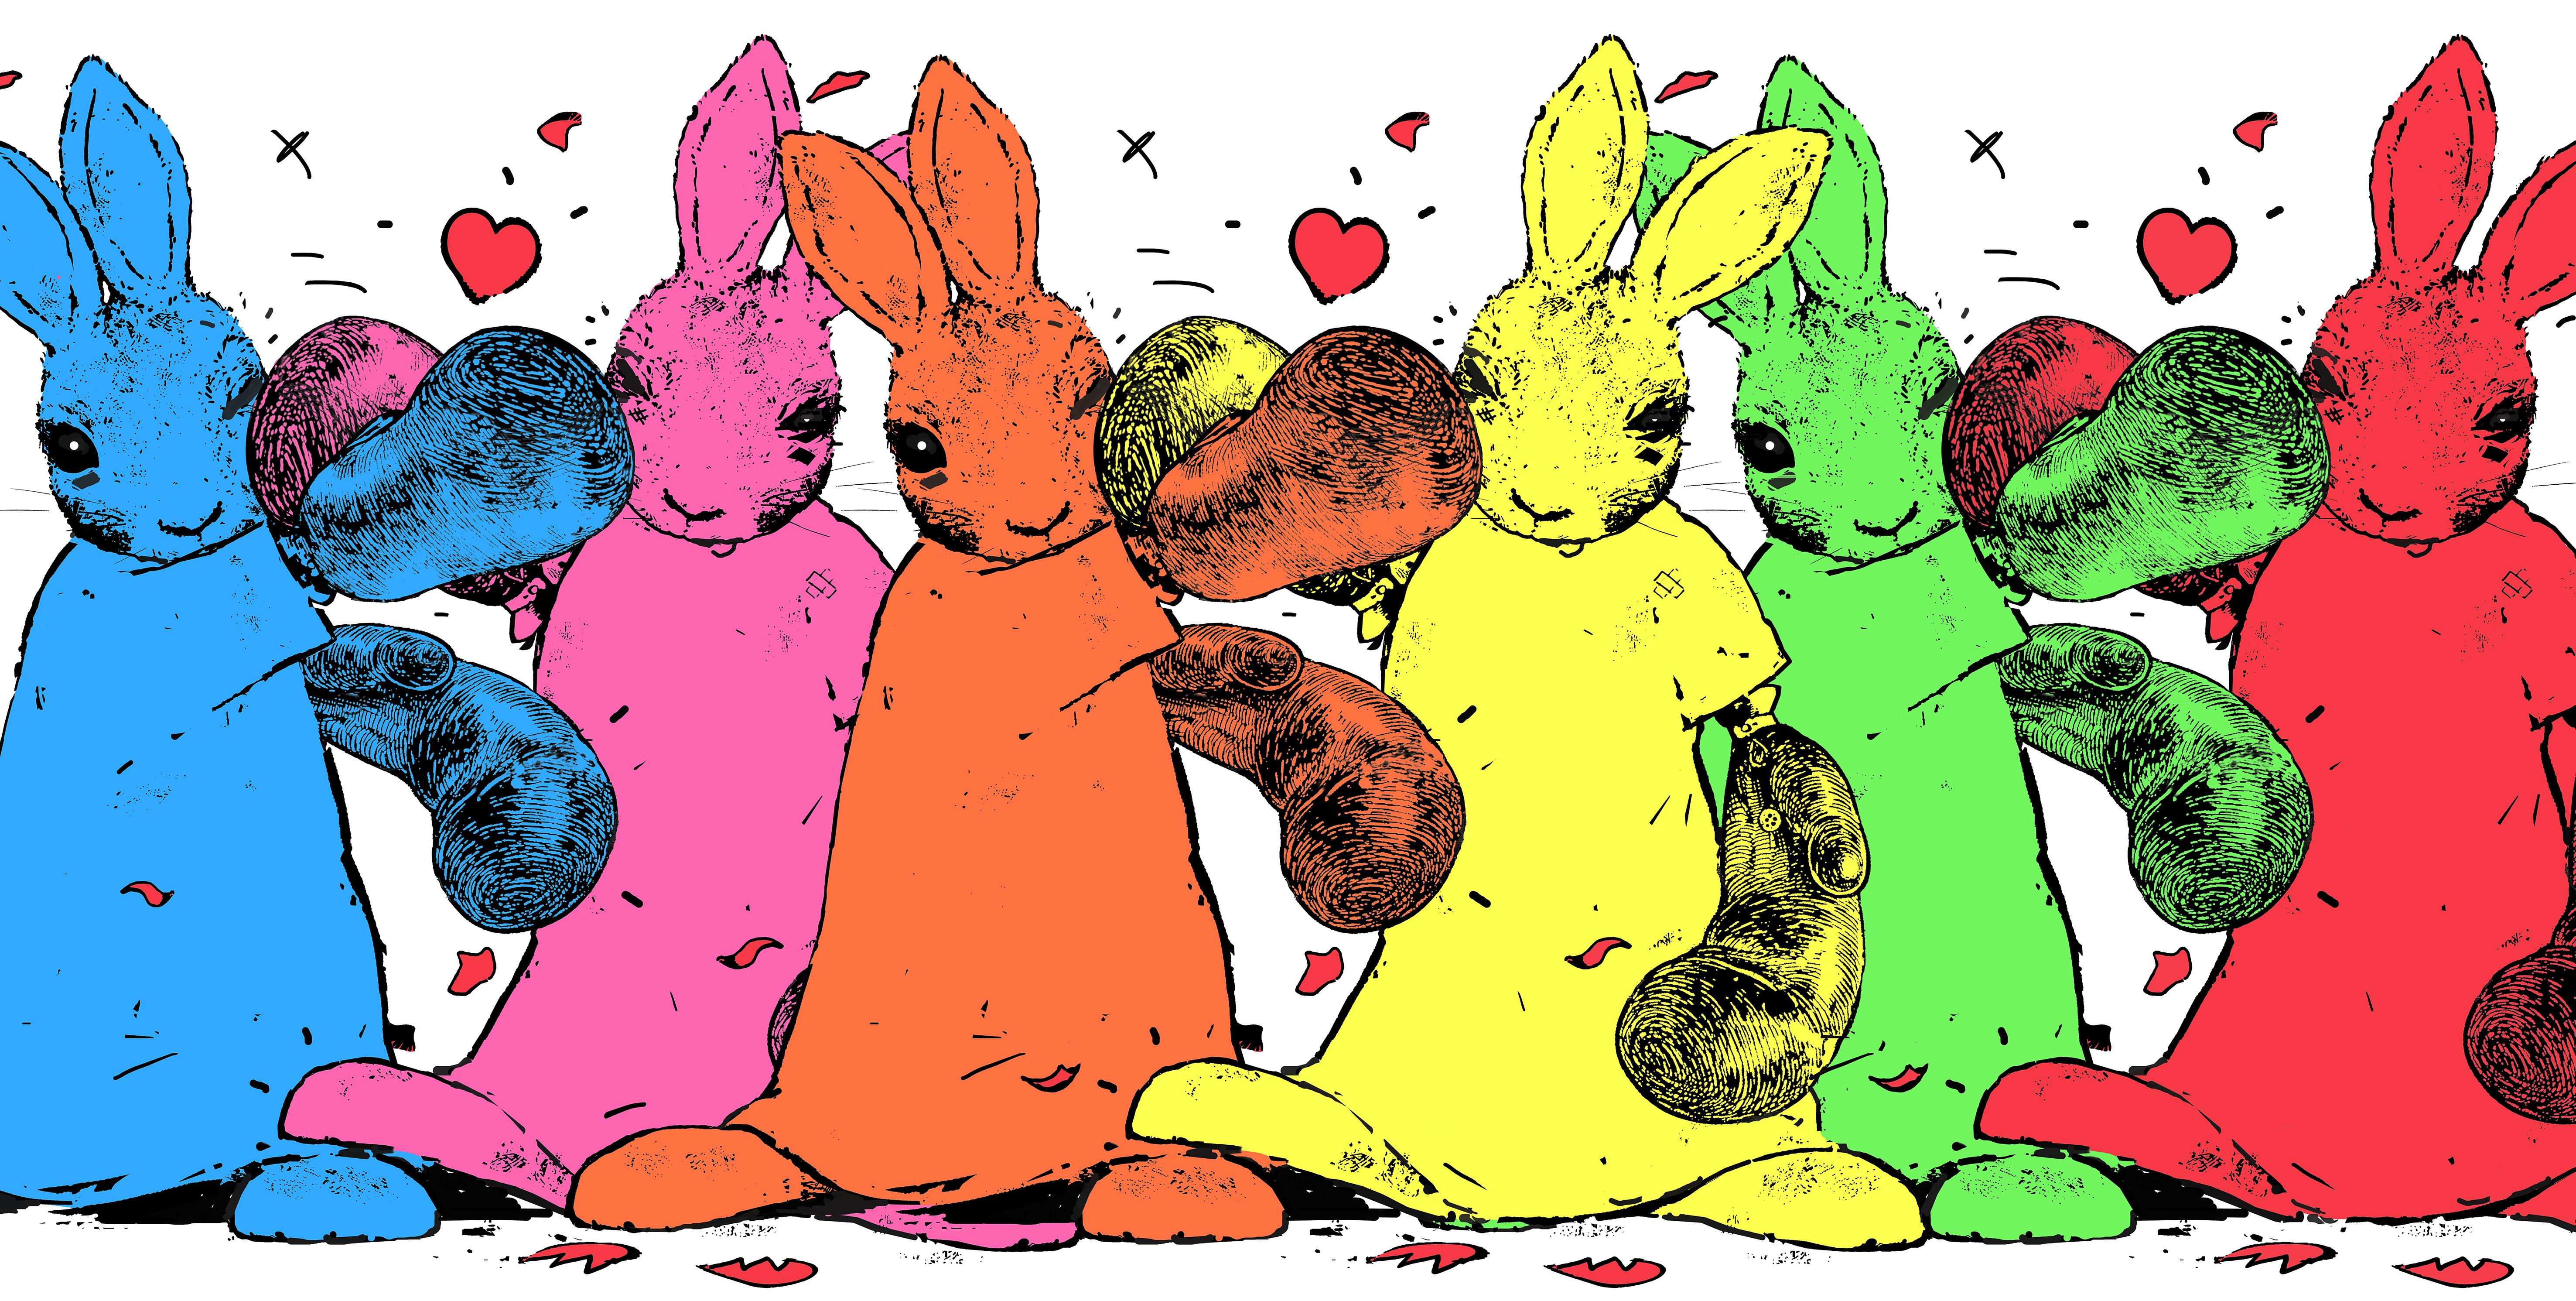 Harry Bunce
United Colours of Bunny Town
Limited Edition Silkscreen Print on 315gsm Heritage White paper
Edition of 45 worldwide
Seven Colour Hand-Pulled Silkscreen Print
Artist stamped/signed and numbered
Image Size: H 40cm x W 87.5cm
Sheet Size: H